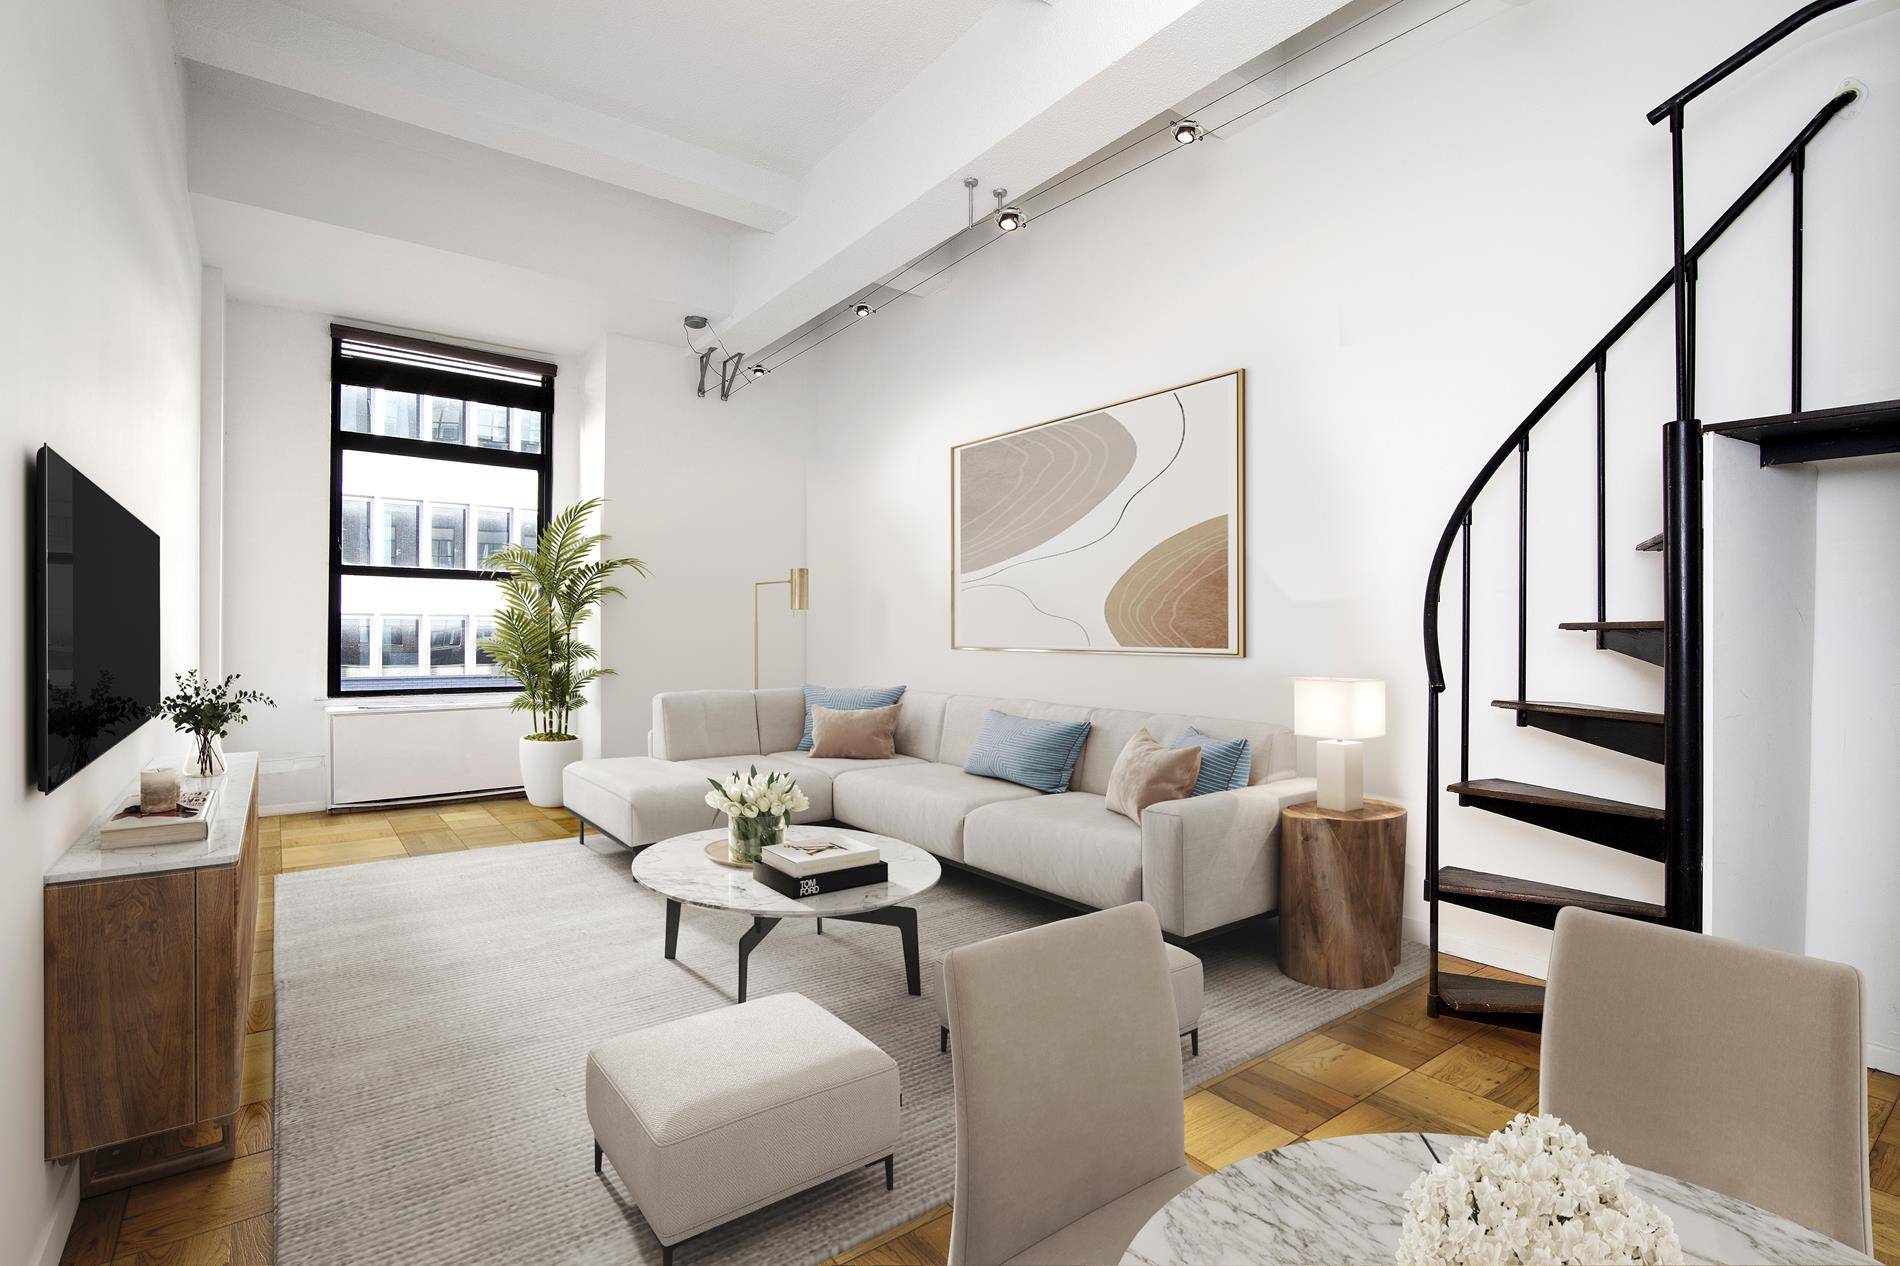 Residence 9D at 244 Madison Avenue is a spacious studio apartment with elevated sleeping loft.